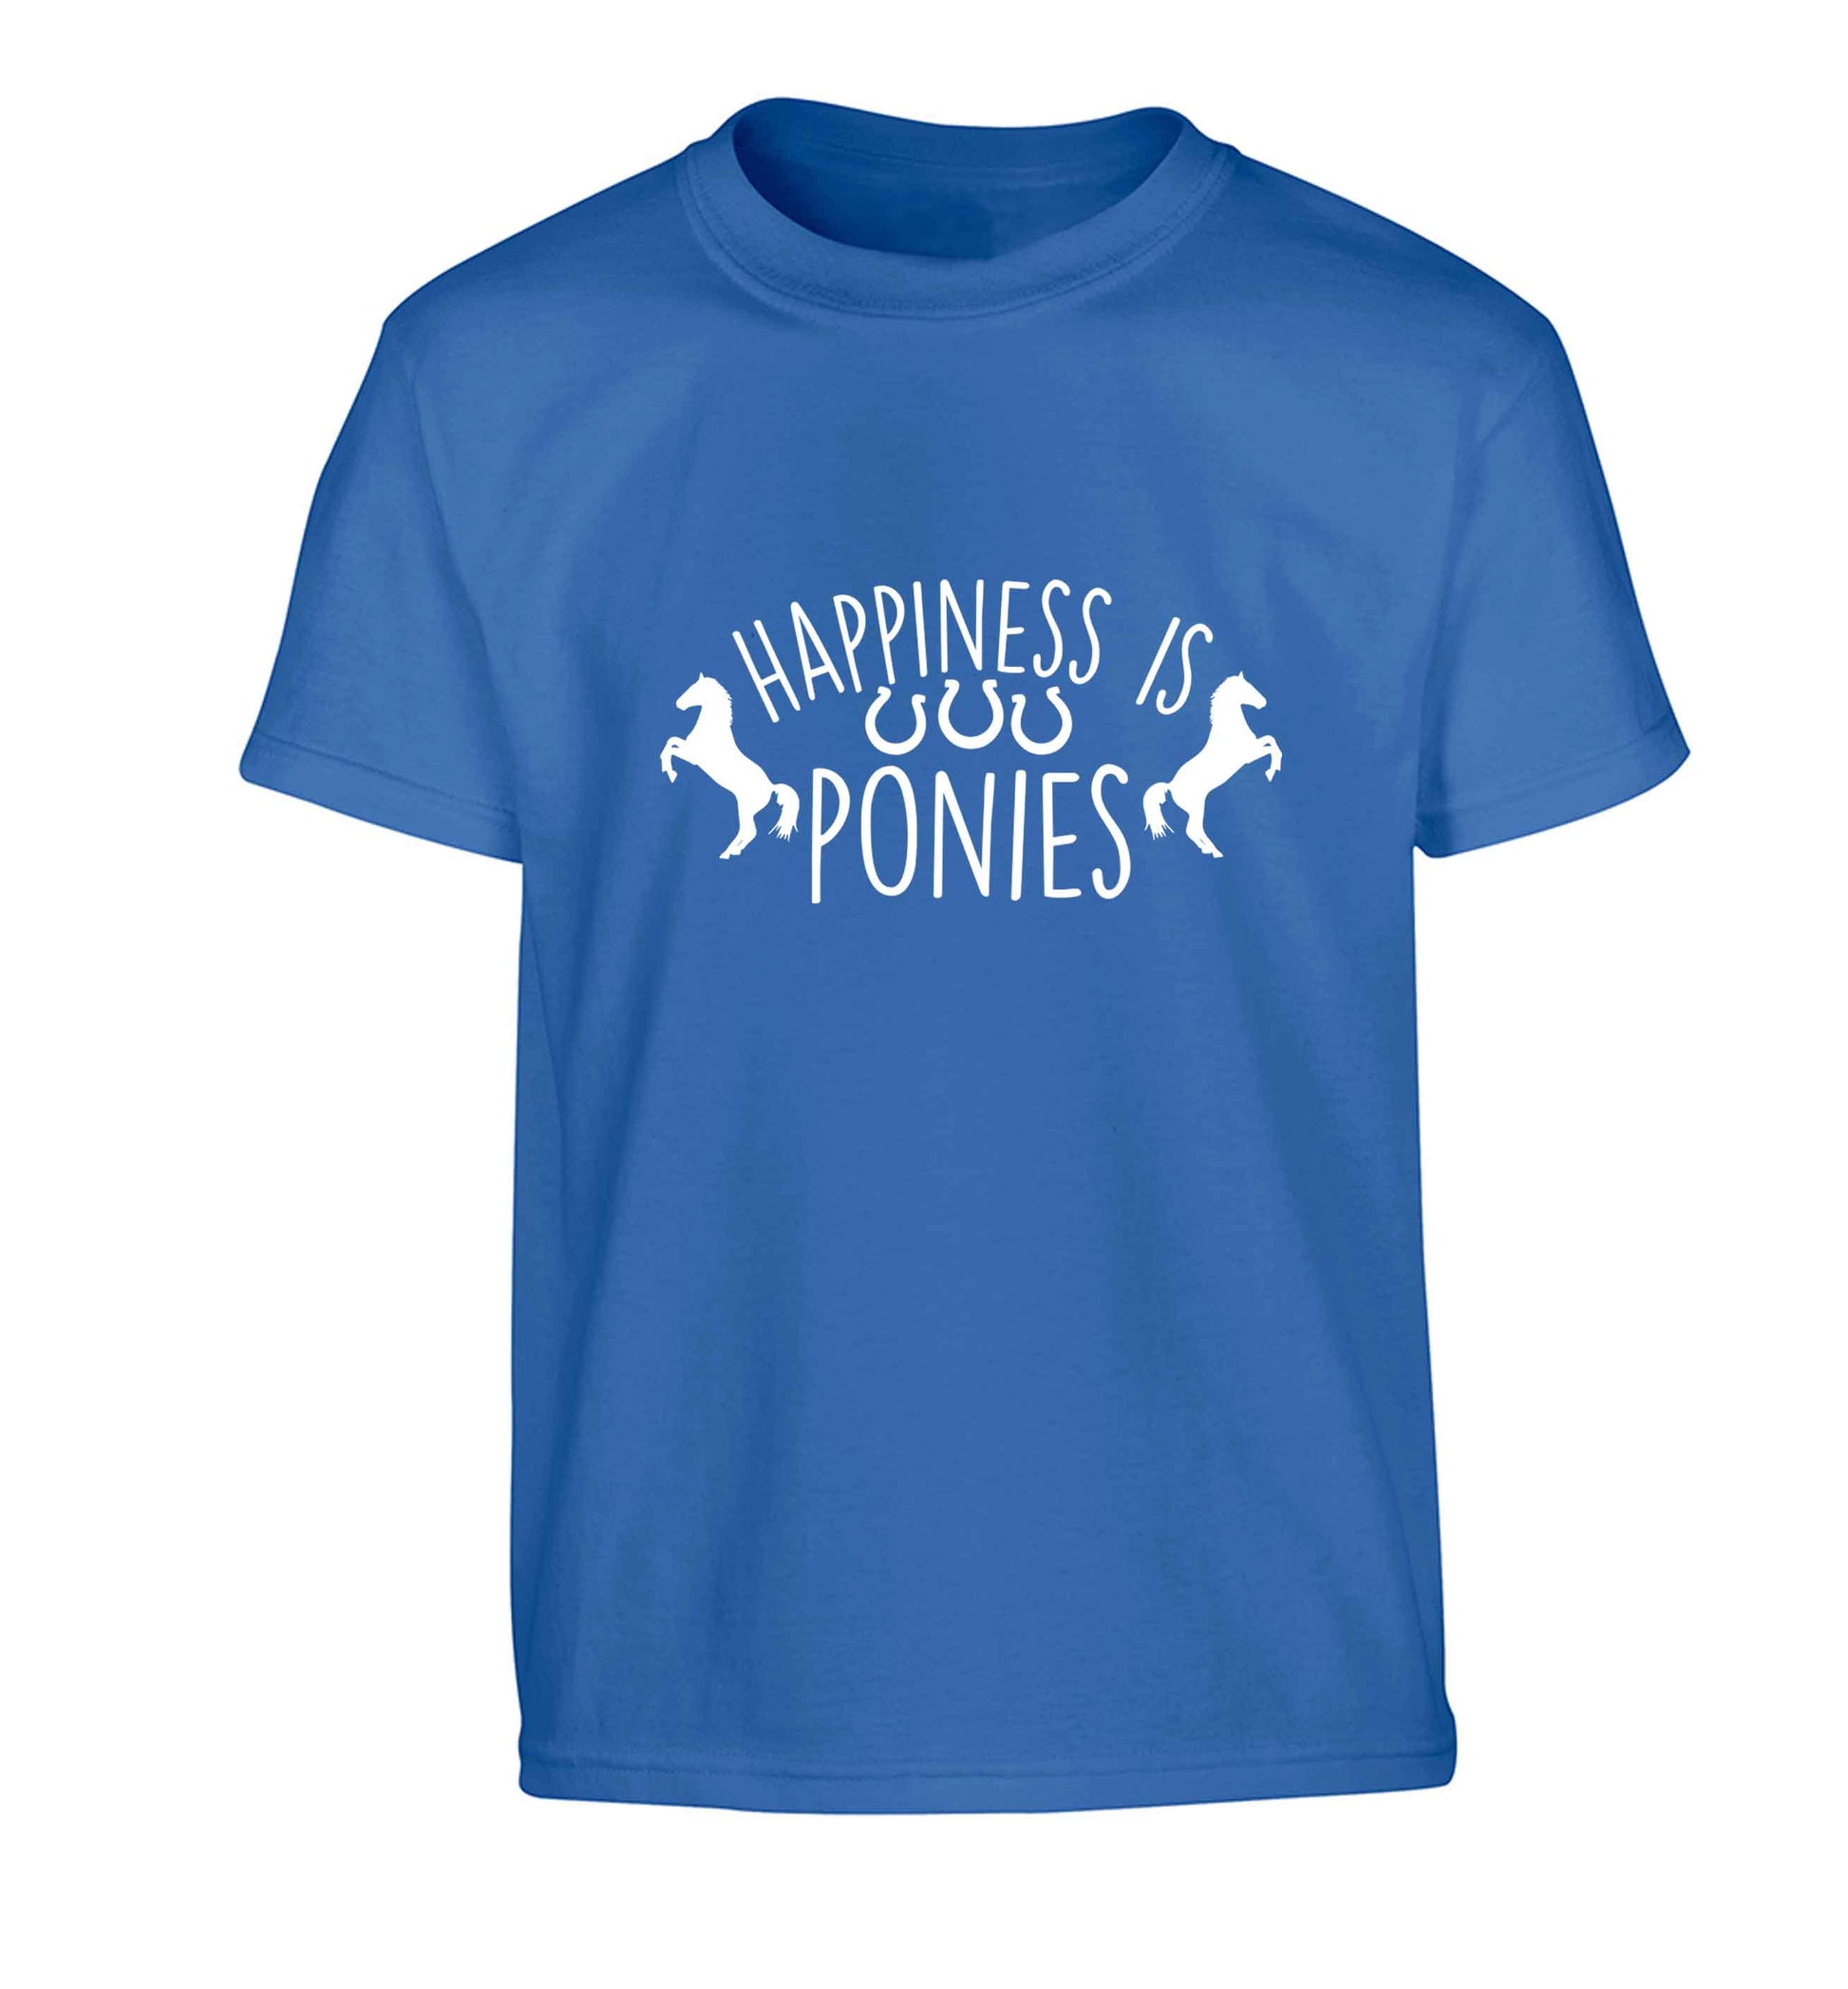 Happiness is ponies Children's blue Tshirt 12-13 Years